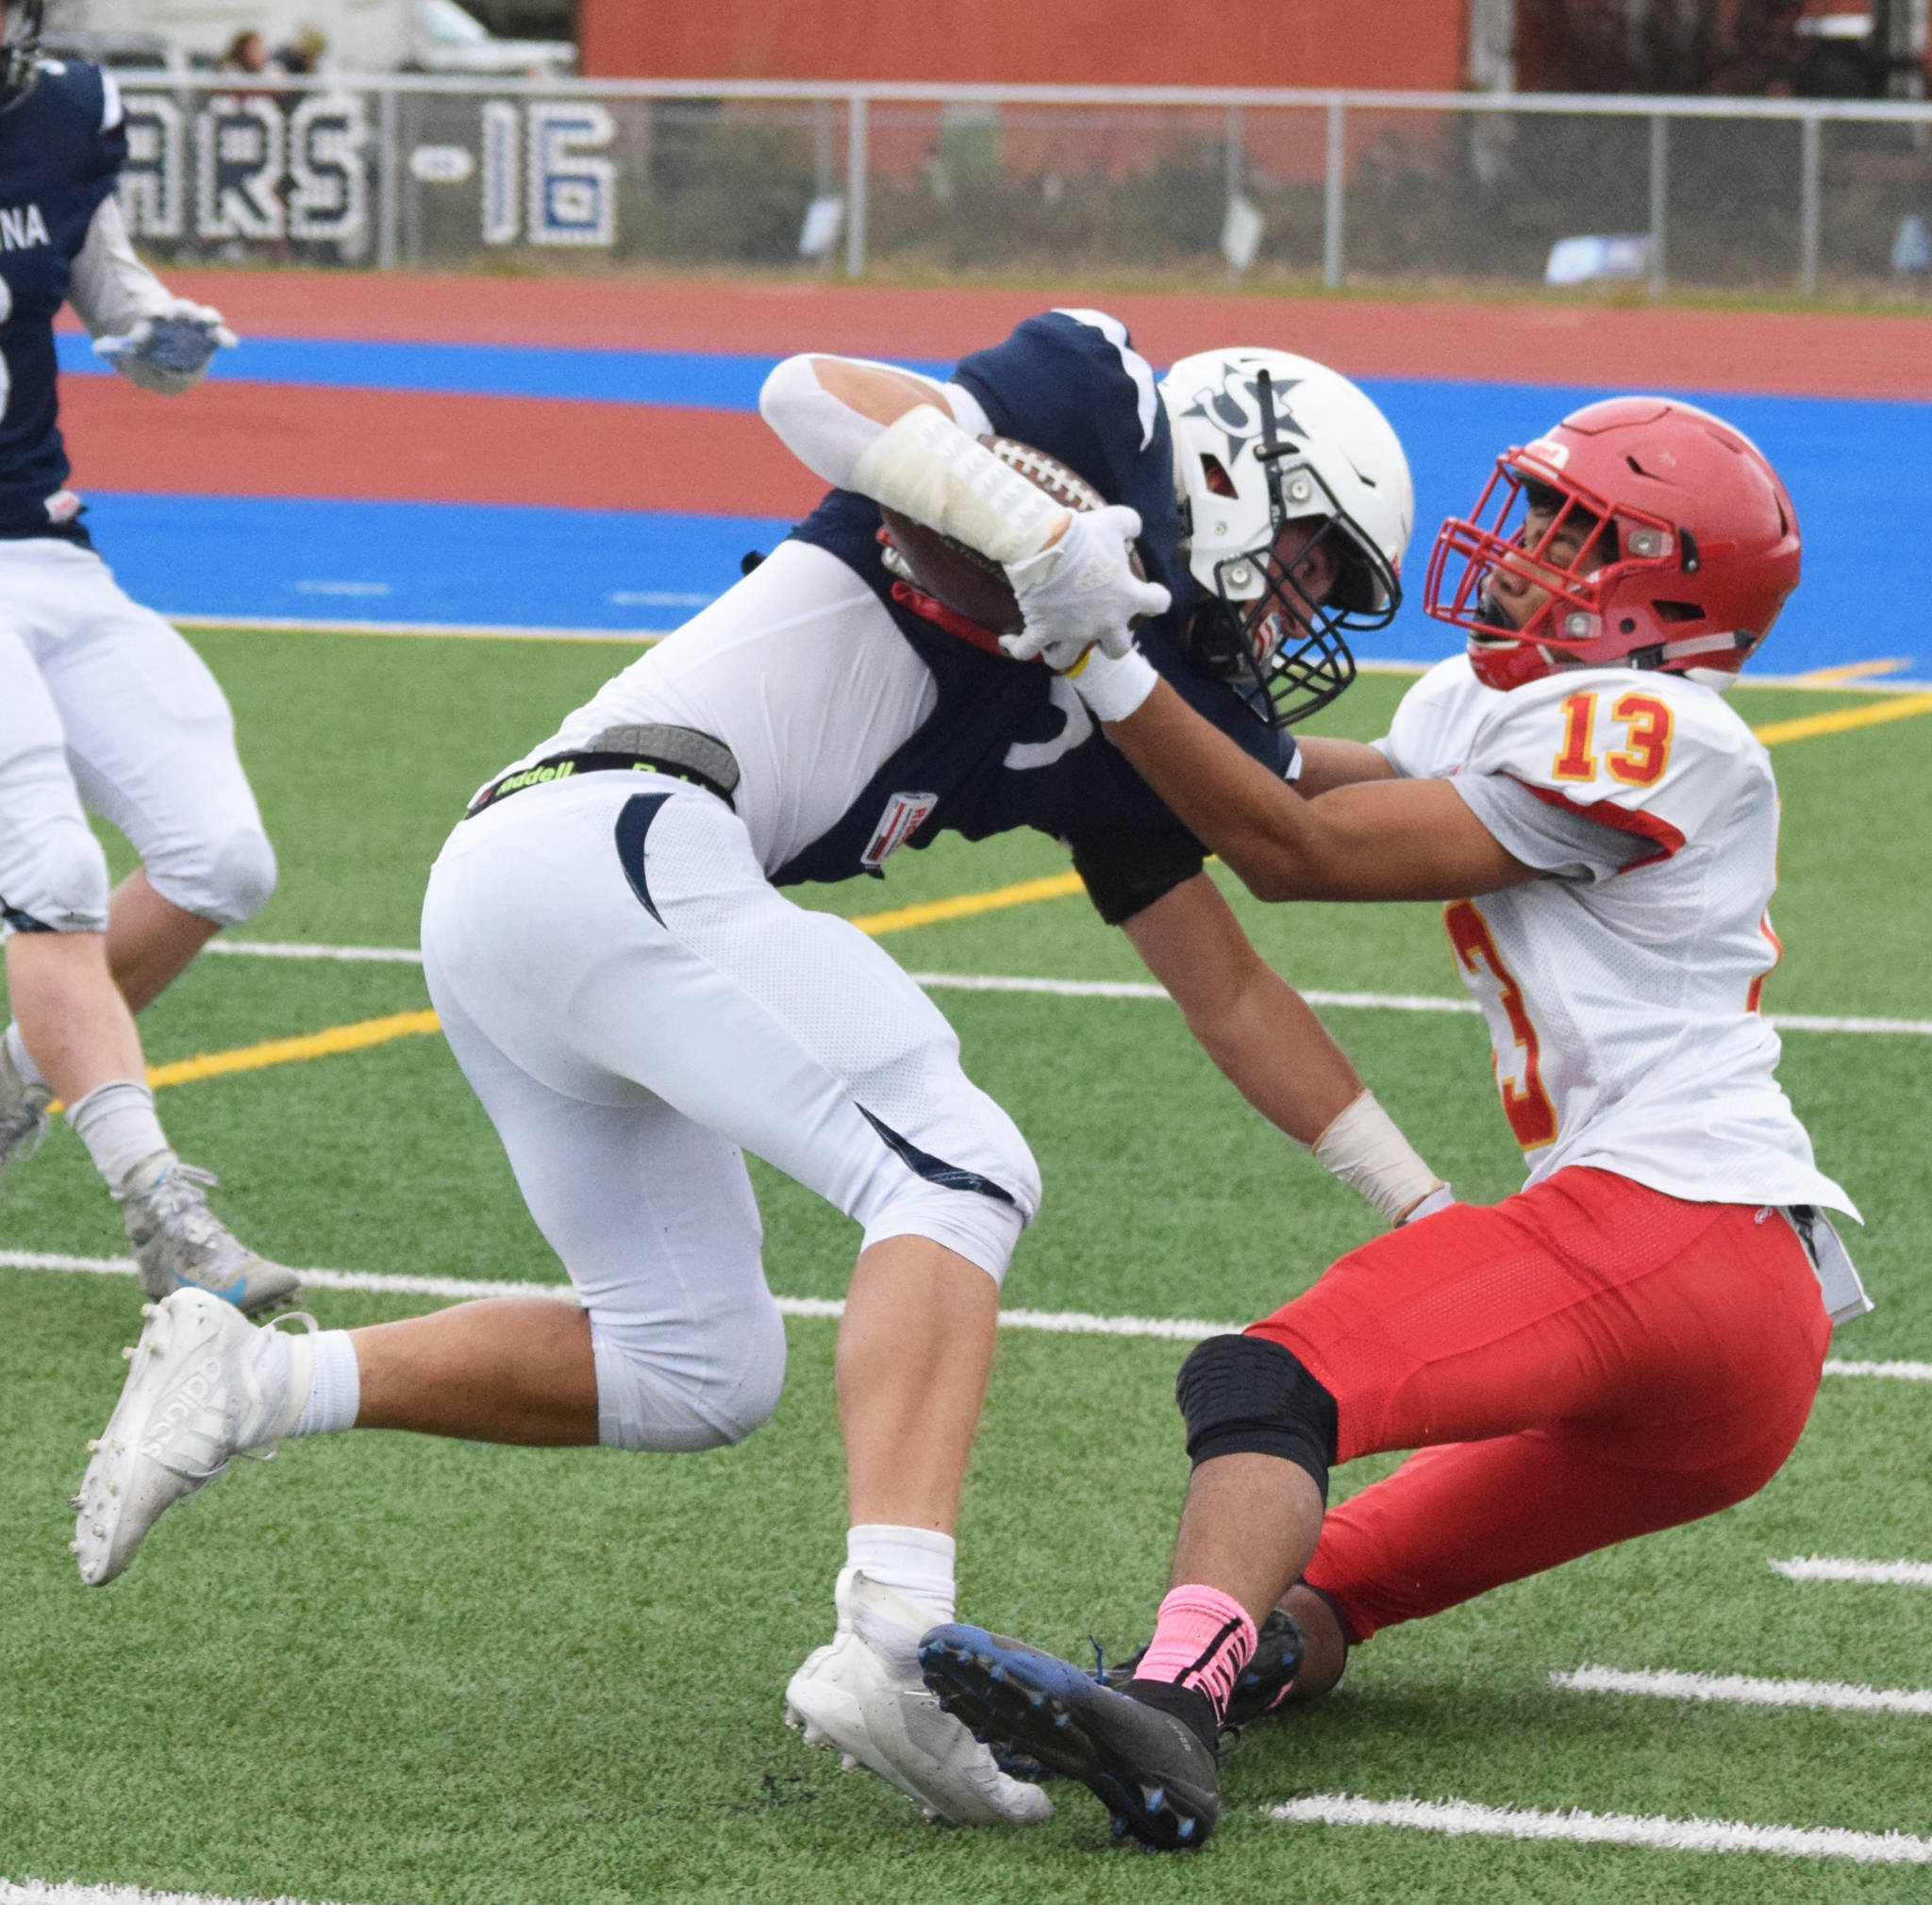 Soldotna’s Hudson Metcalf is tackled to the ground by West Valley’s Tyriq Nance in a Div. II state semifinal Friday, Oct. 11, 2019, in Soldotna, Alaska. (Photo by Joey Klecka/Peninsula Clarion)